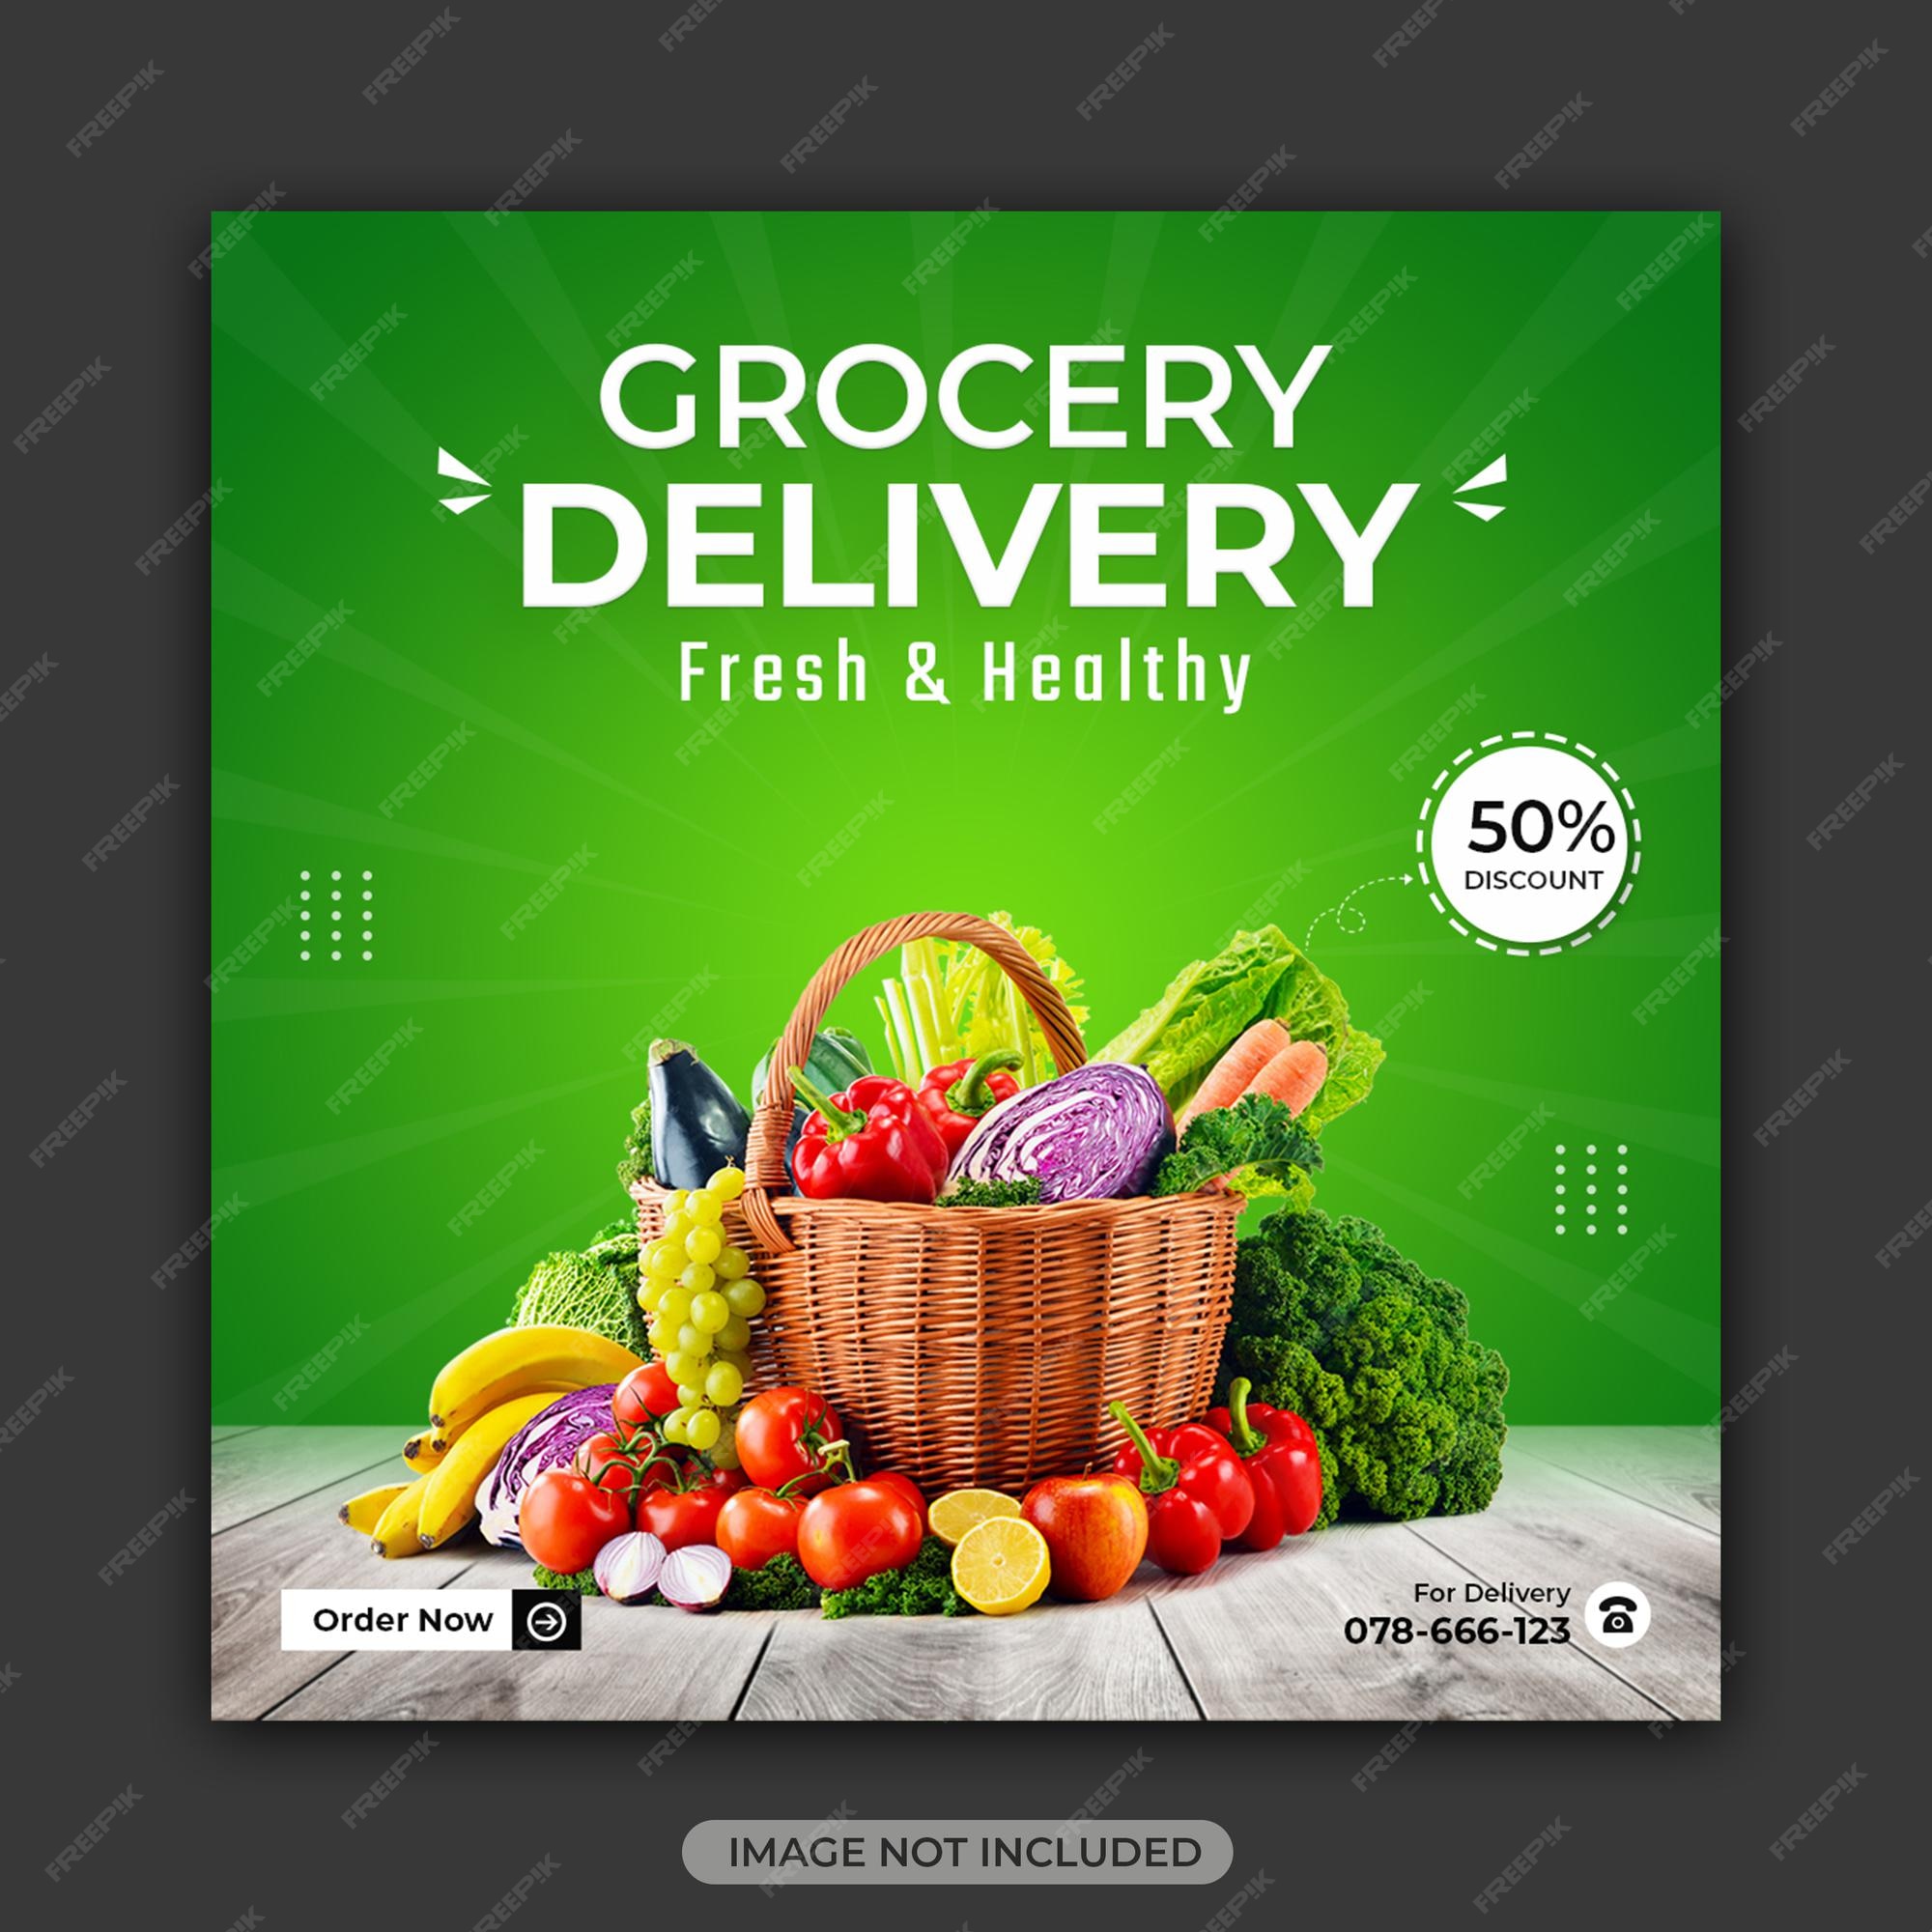 Premium PSD | Grocery shop delivery social media post design or ...